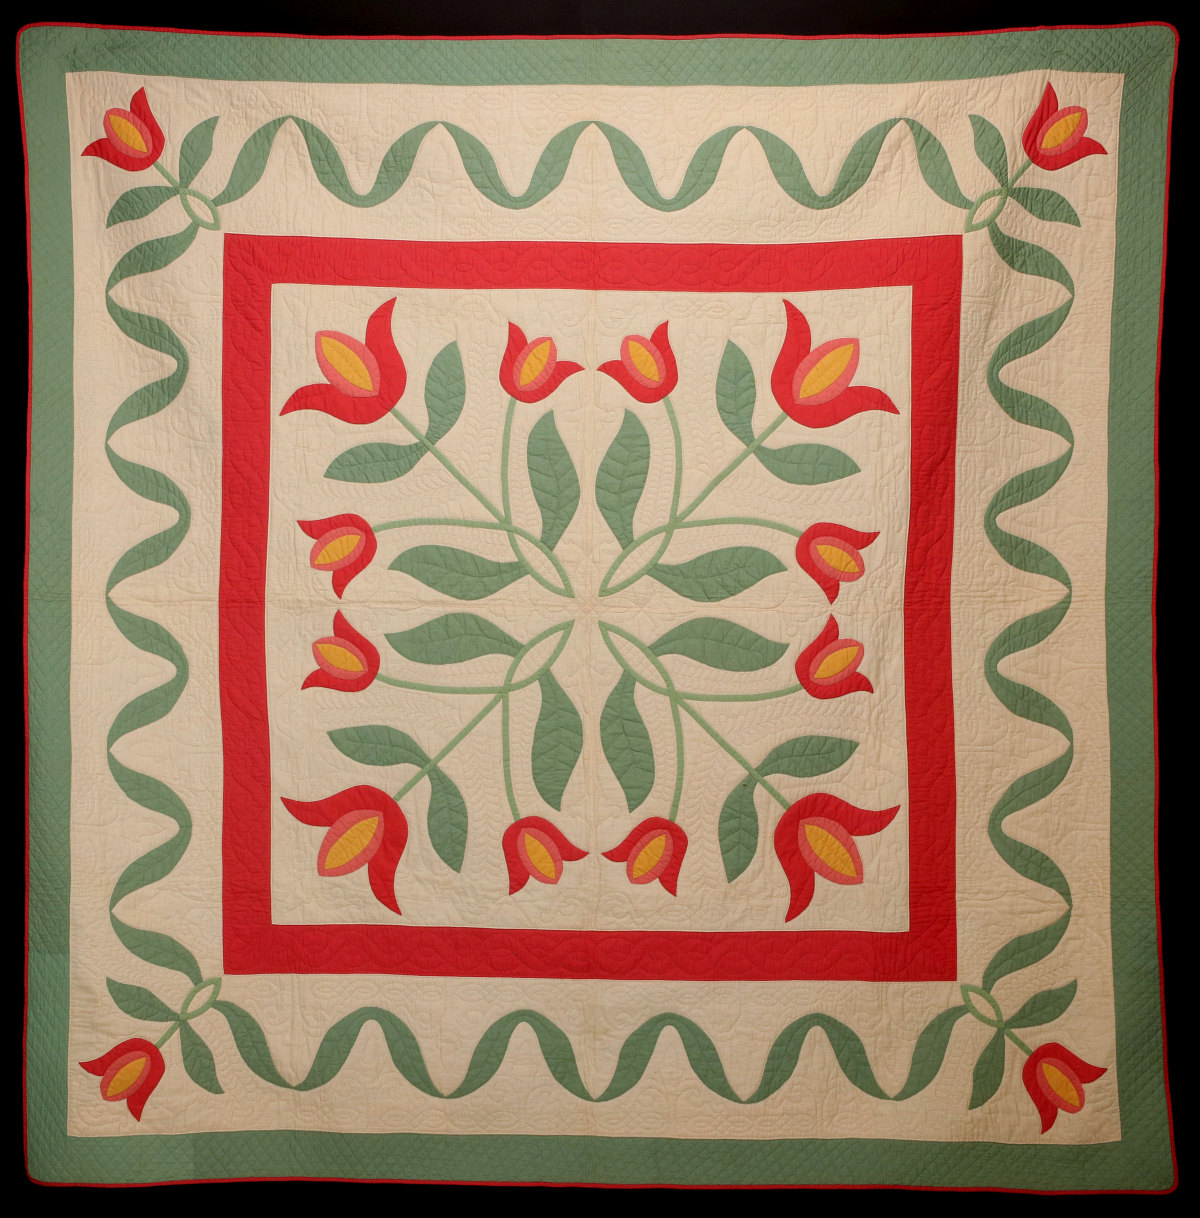 A GOOD 1930s HAND STITCHED APPLIQUE QUILT WITH TULIPS